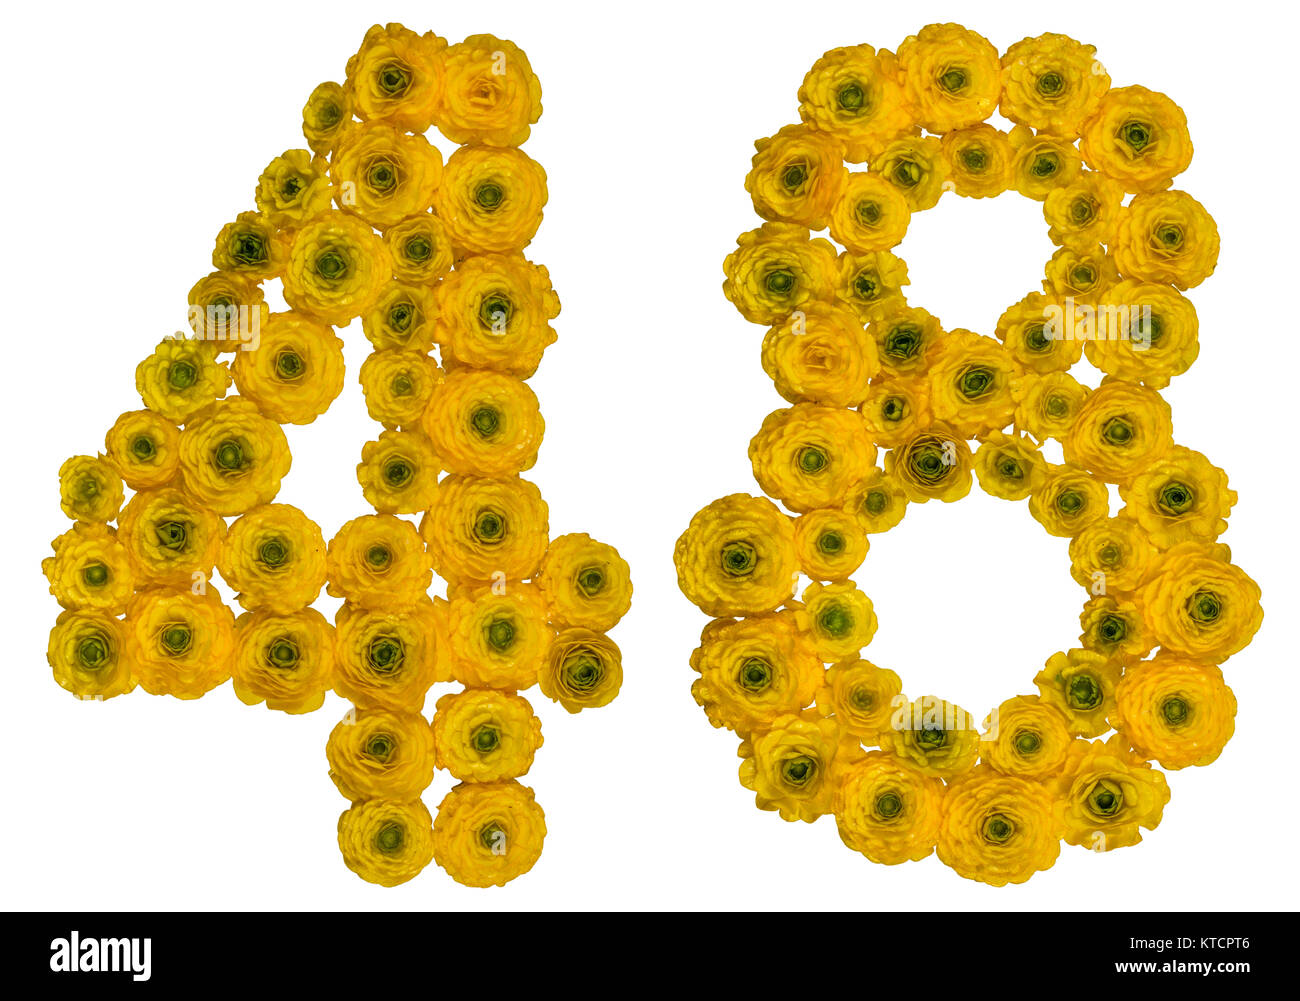 Arabic numeral 48, forty eight, from yellow flowers of buttercup, isolated on white background Stock Photo